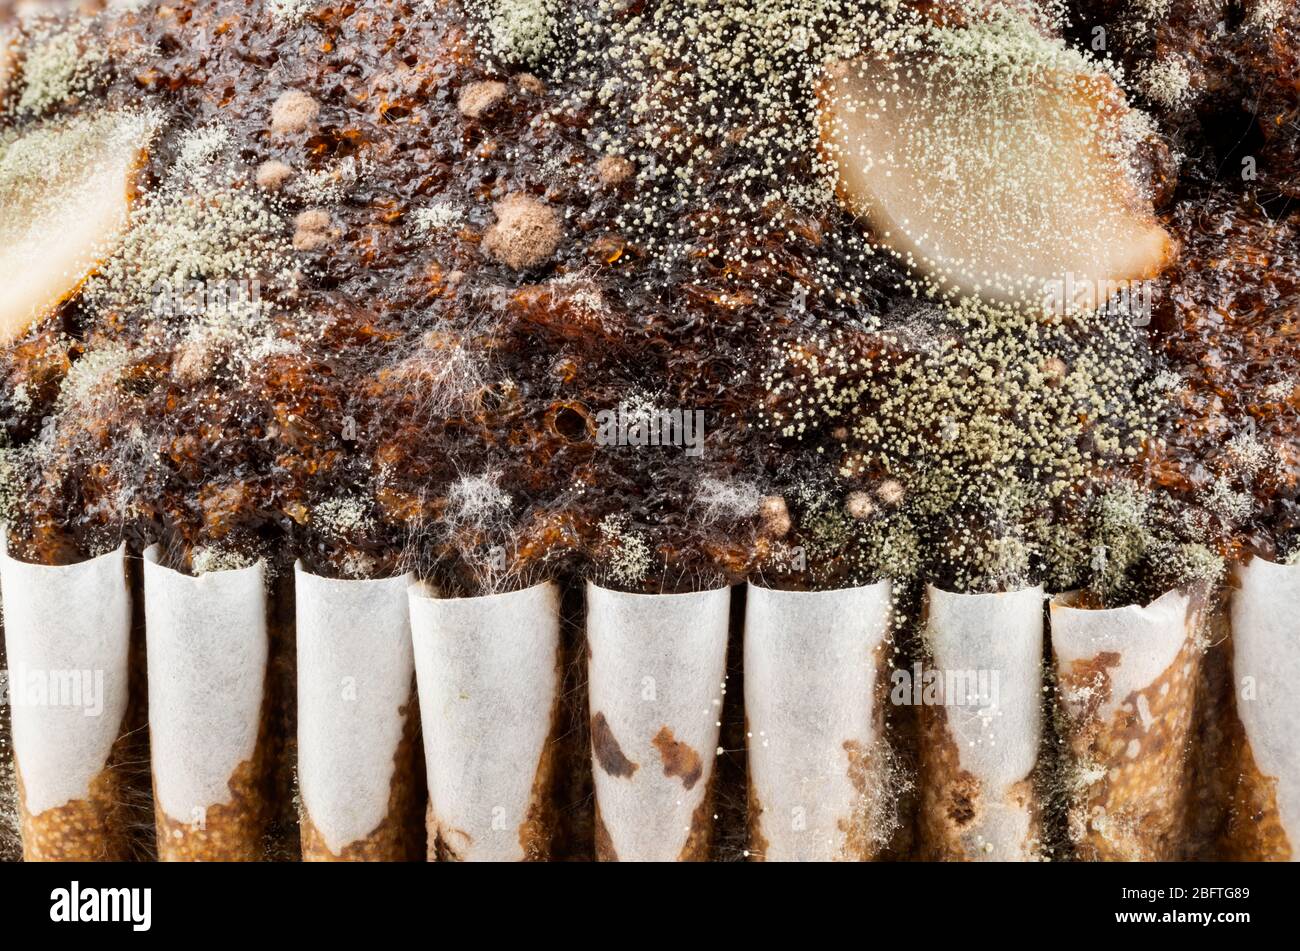 Closeup picture of mold growing on the surface of spoiled chocolate muffin. Stock Photo